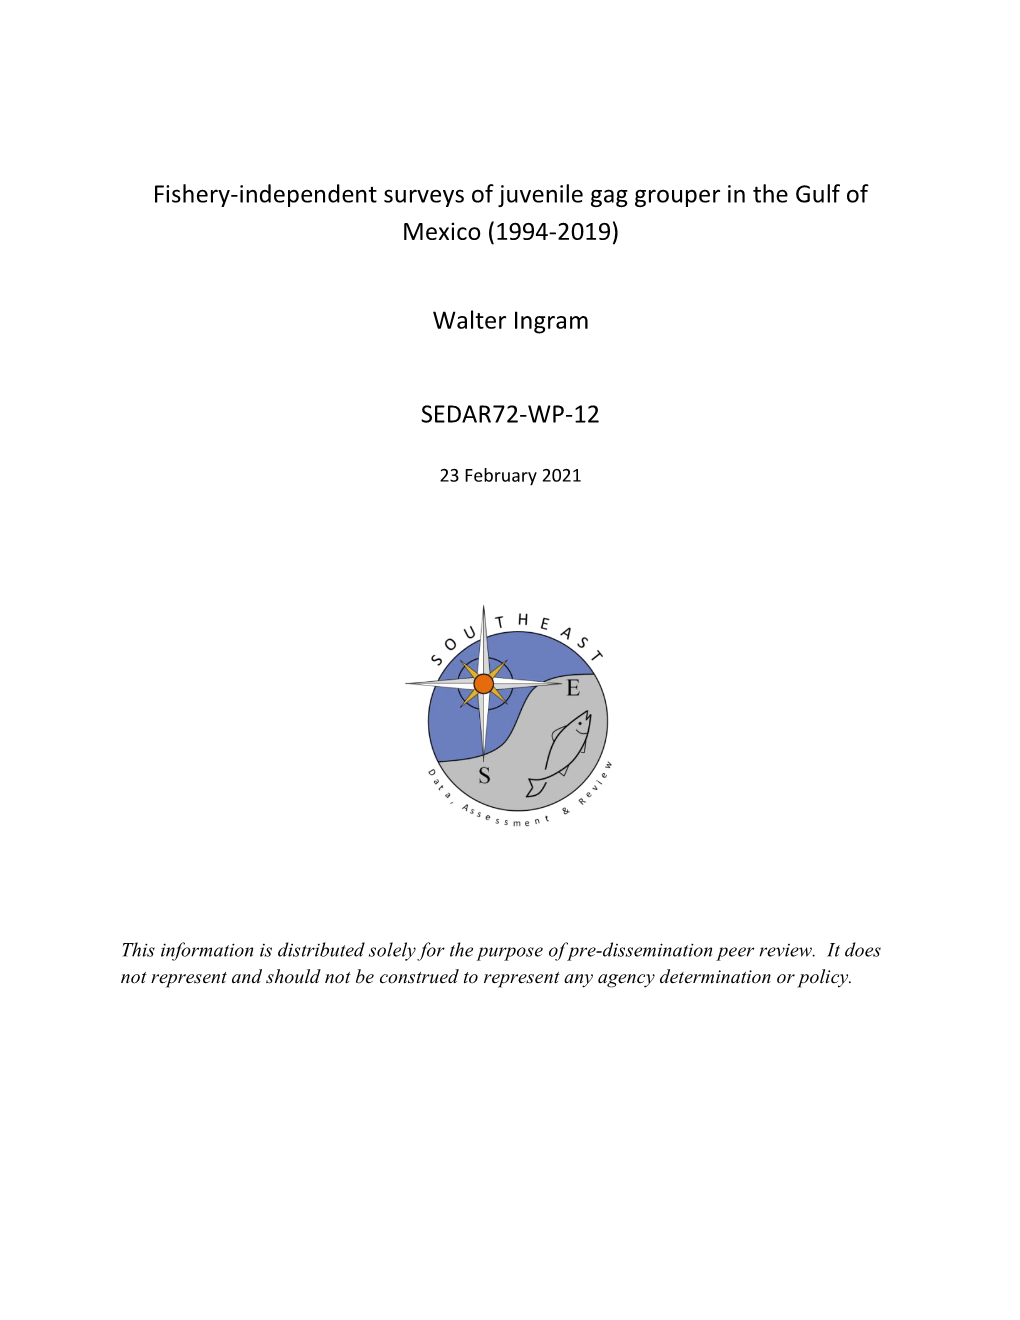 Fishery-Independent Surveys of Juvenile Gag Grouper in the Gulf of Mexico (1994-2019)